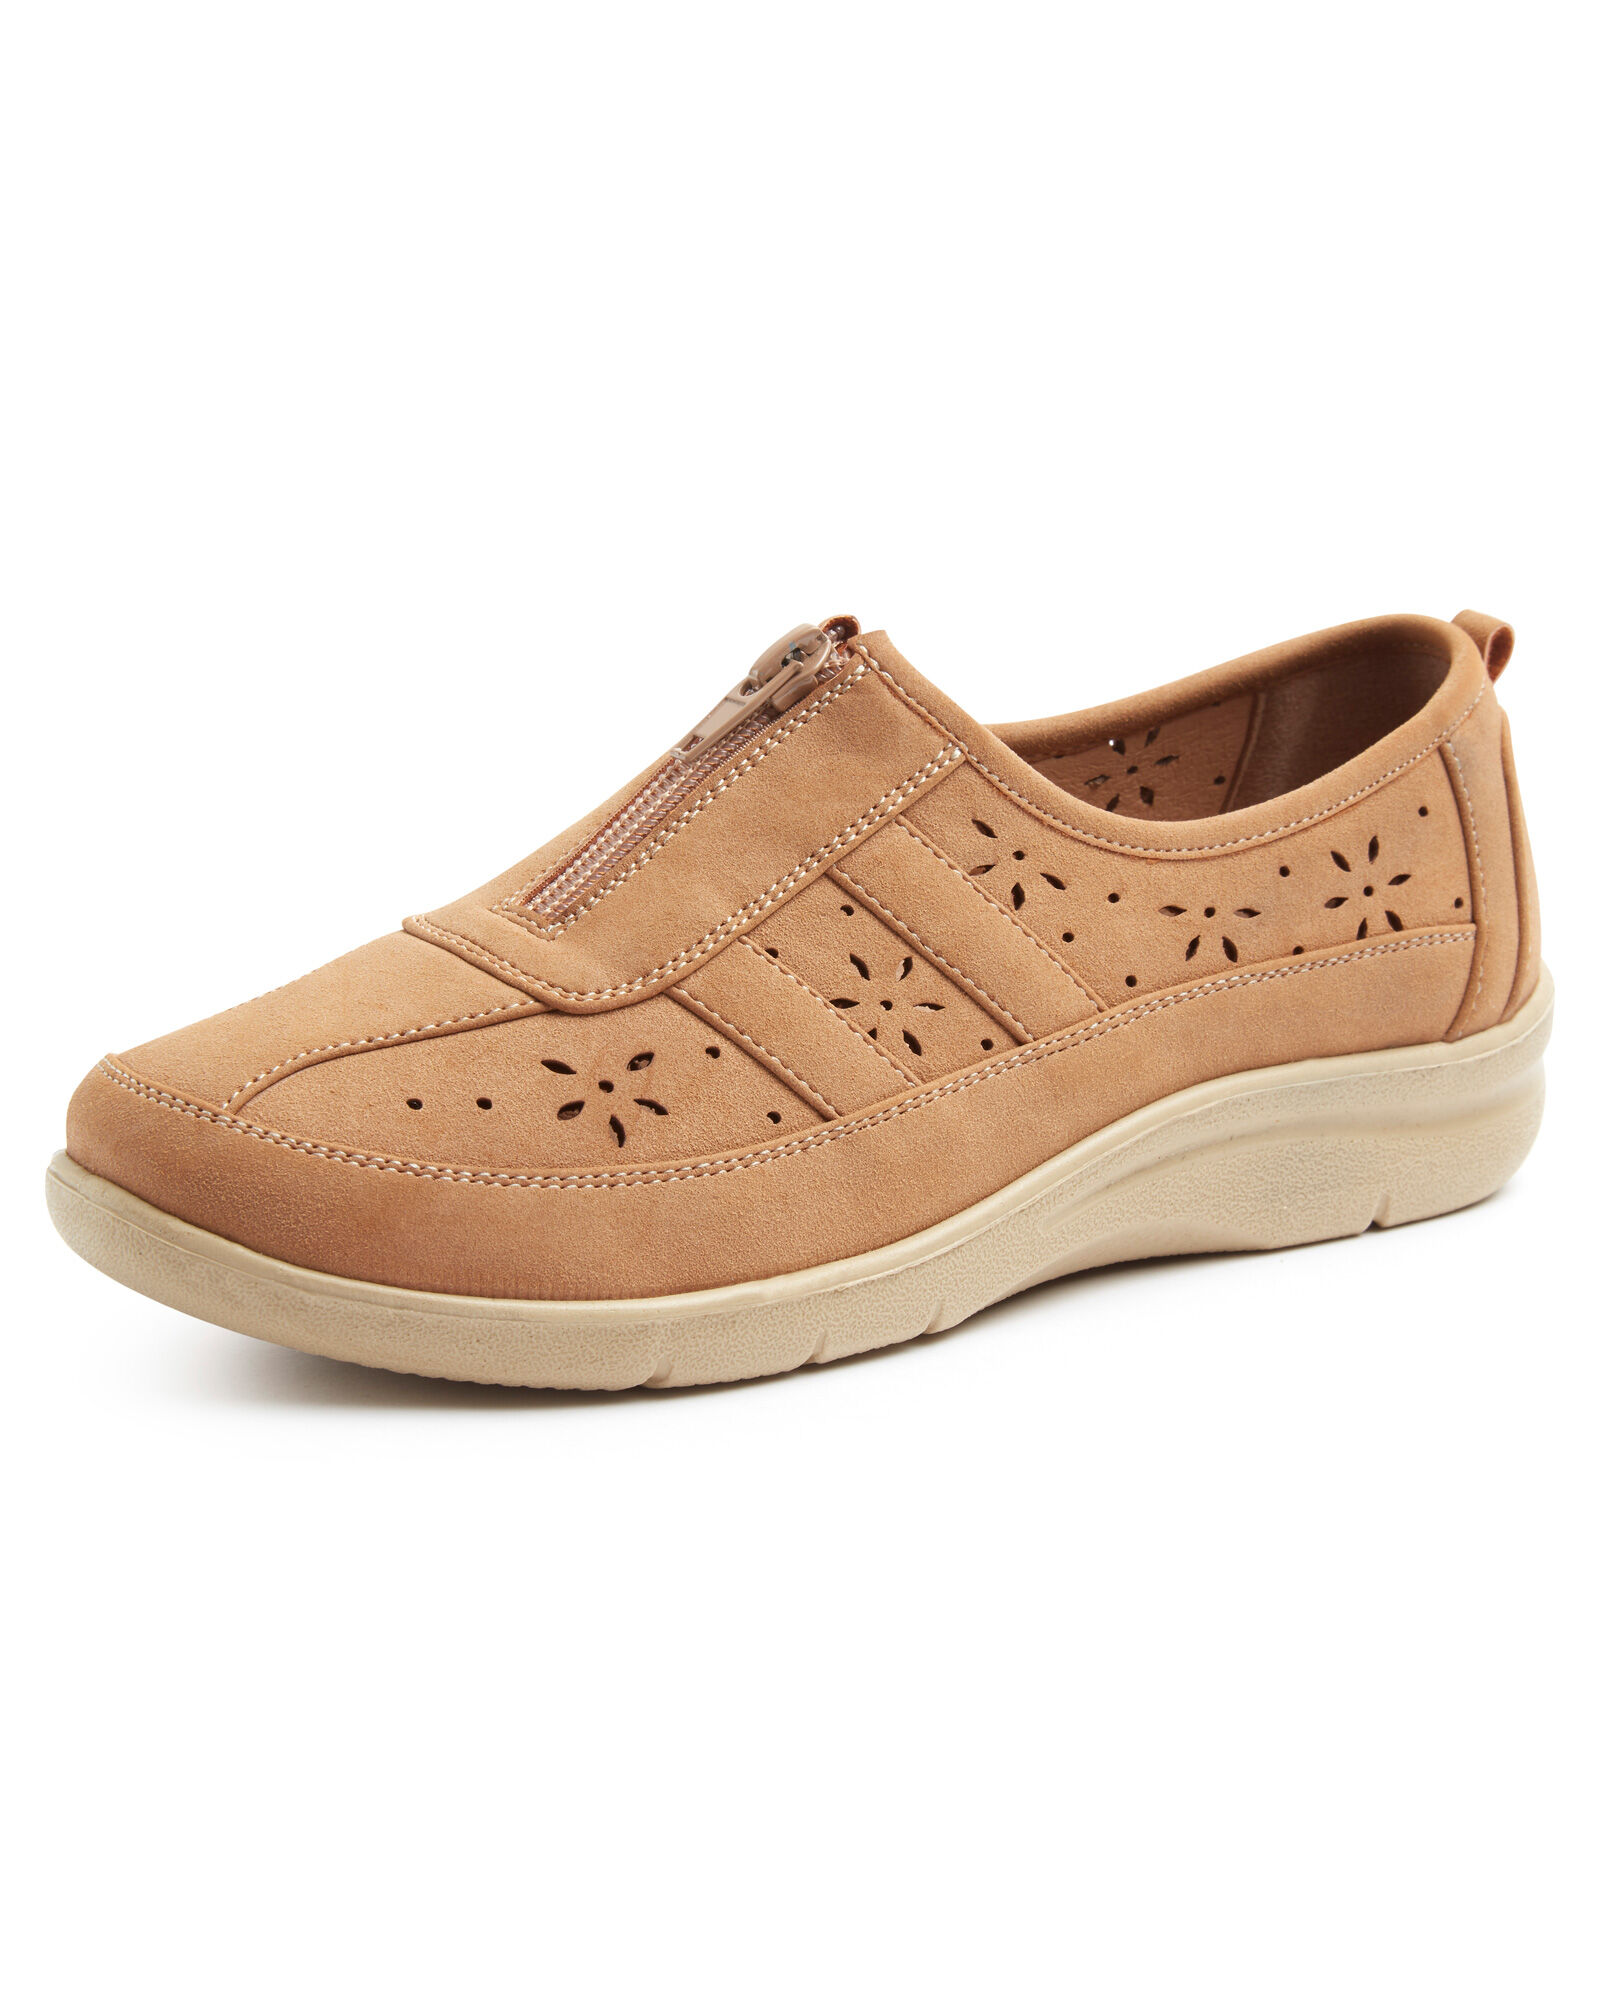 cotton traders womens shoes sale